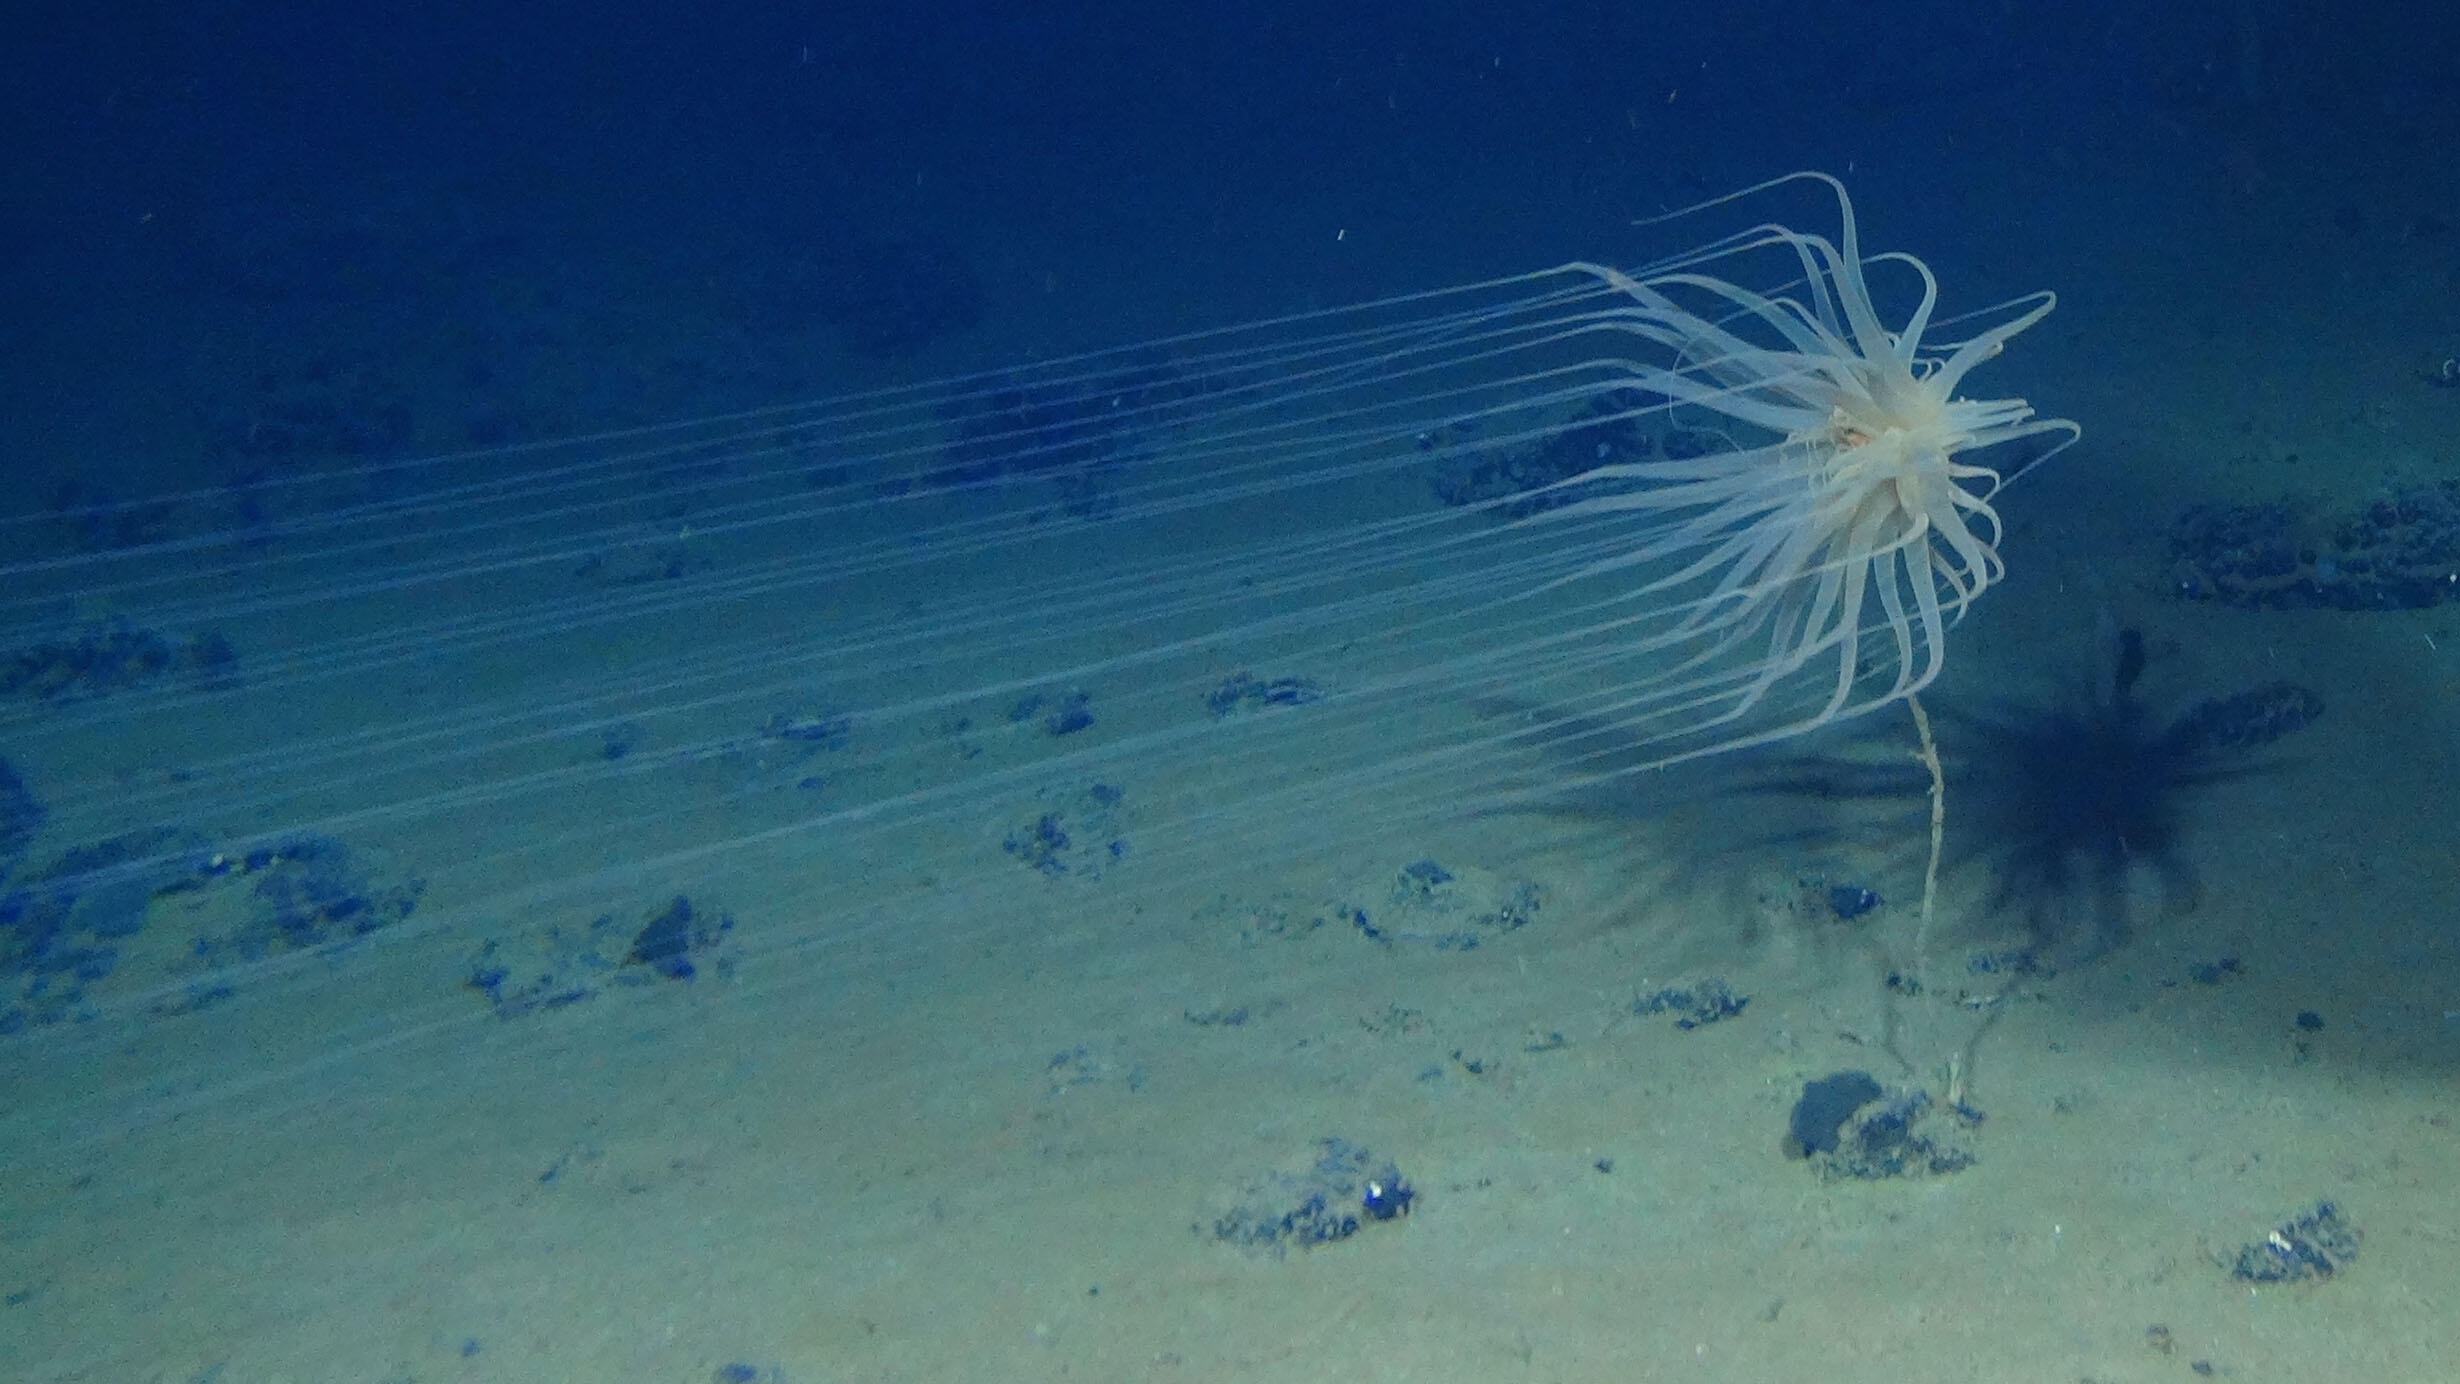 Relicanthus daphneae swimming near the seafloor.